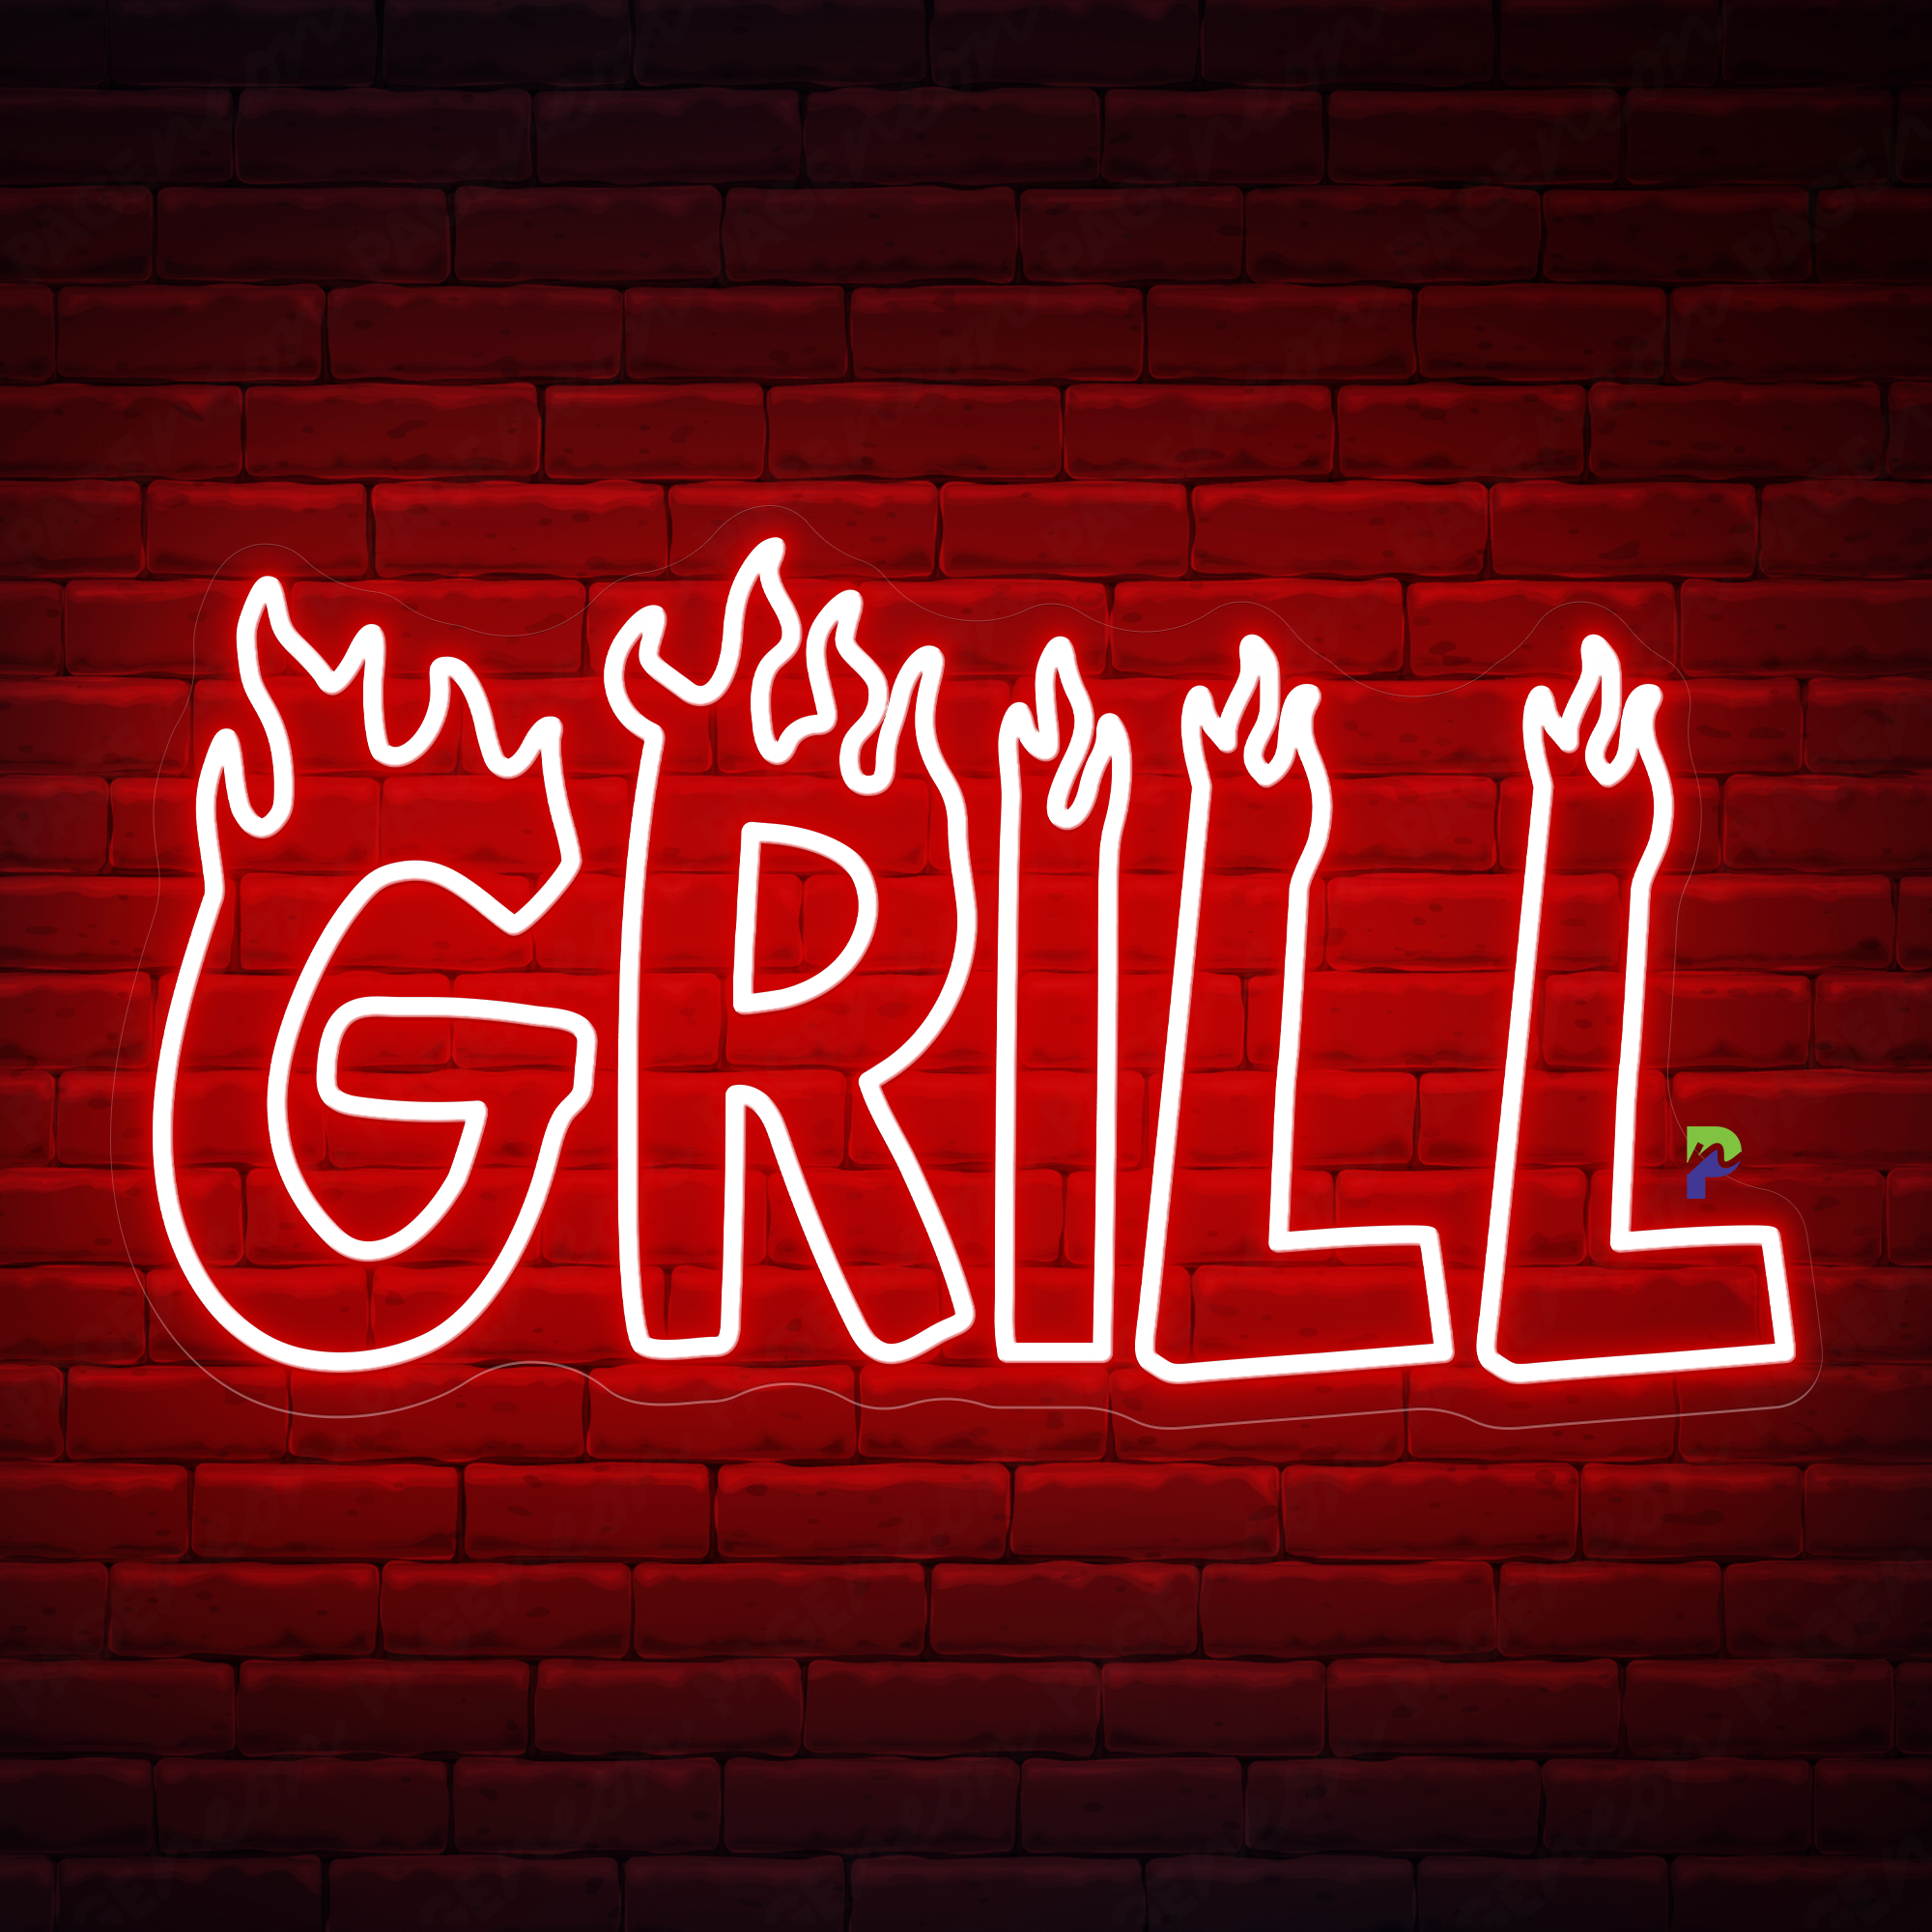 Grill Neon Sign Business Large Led Light